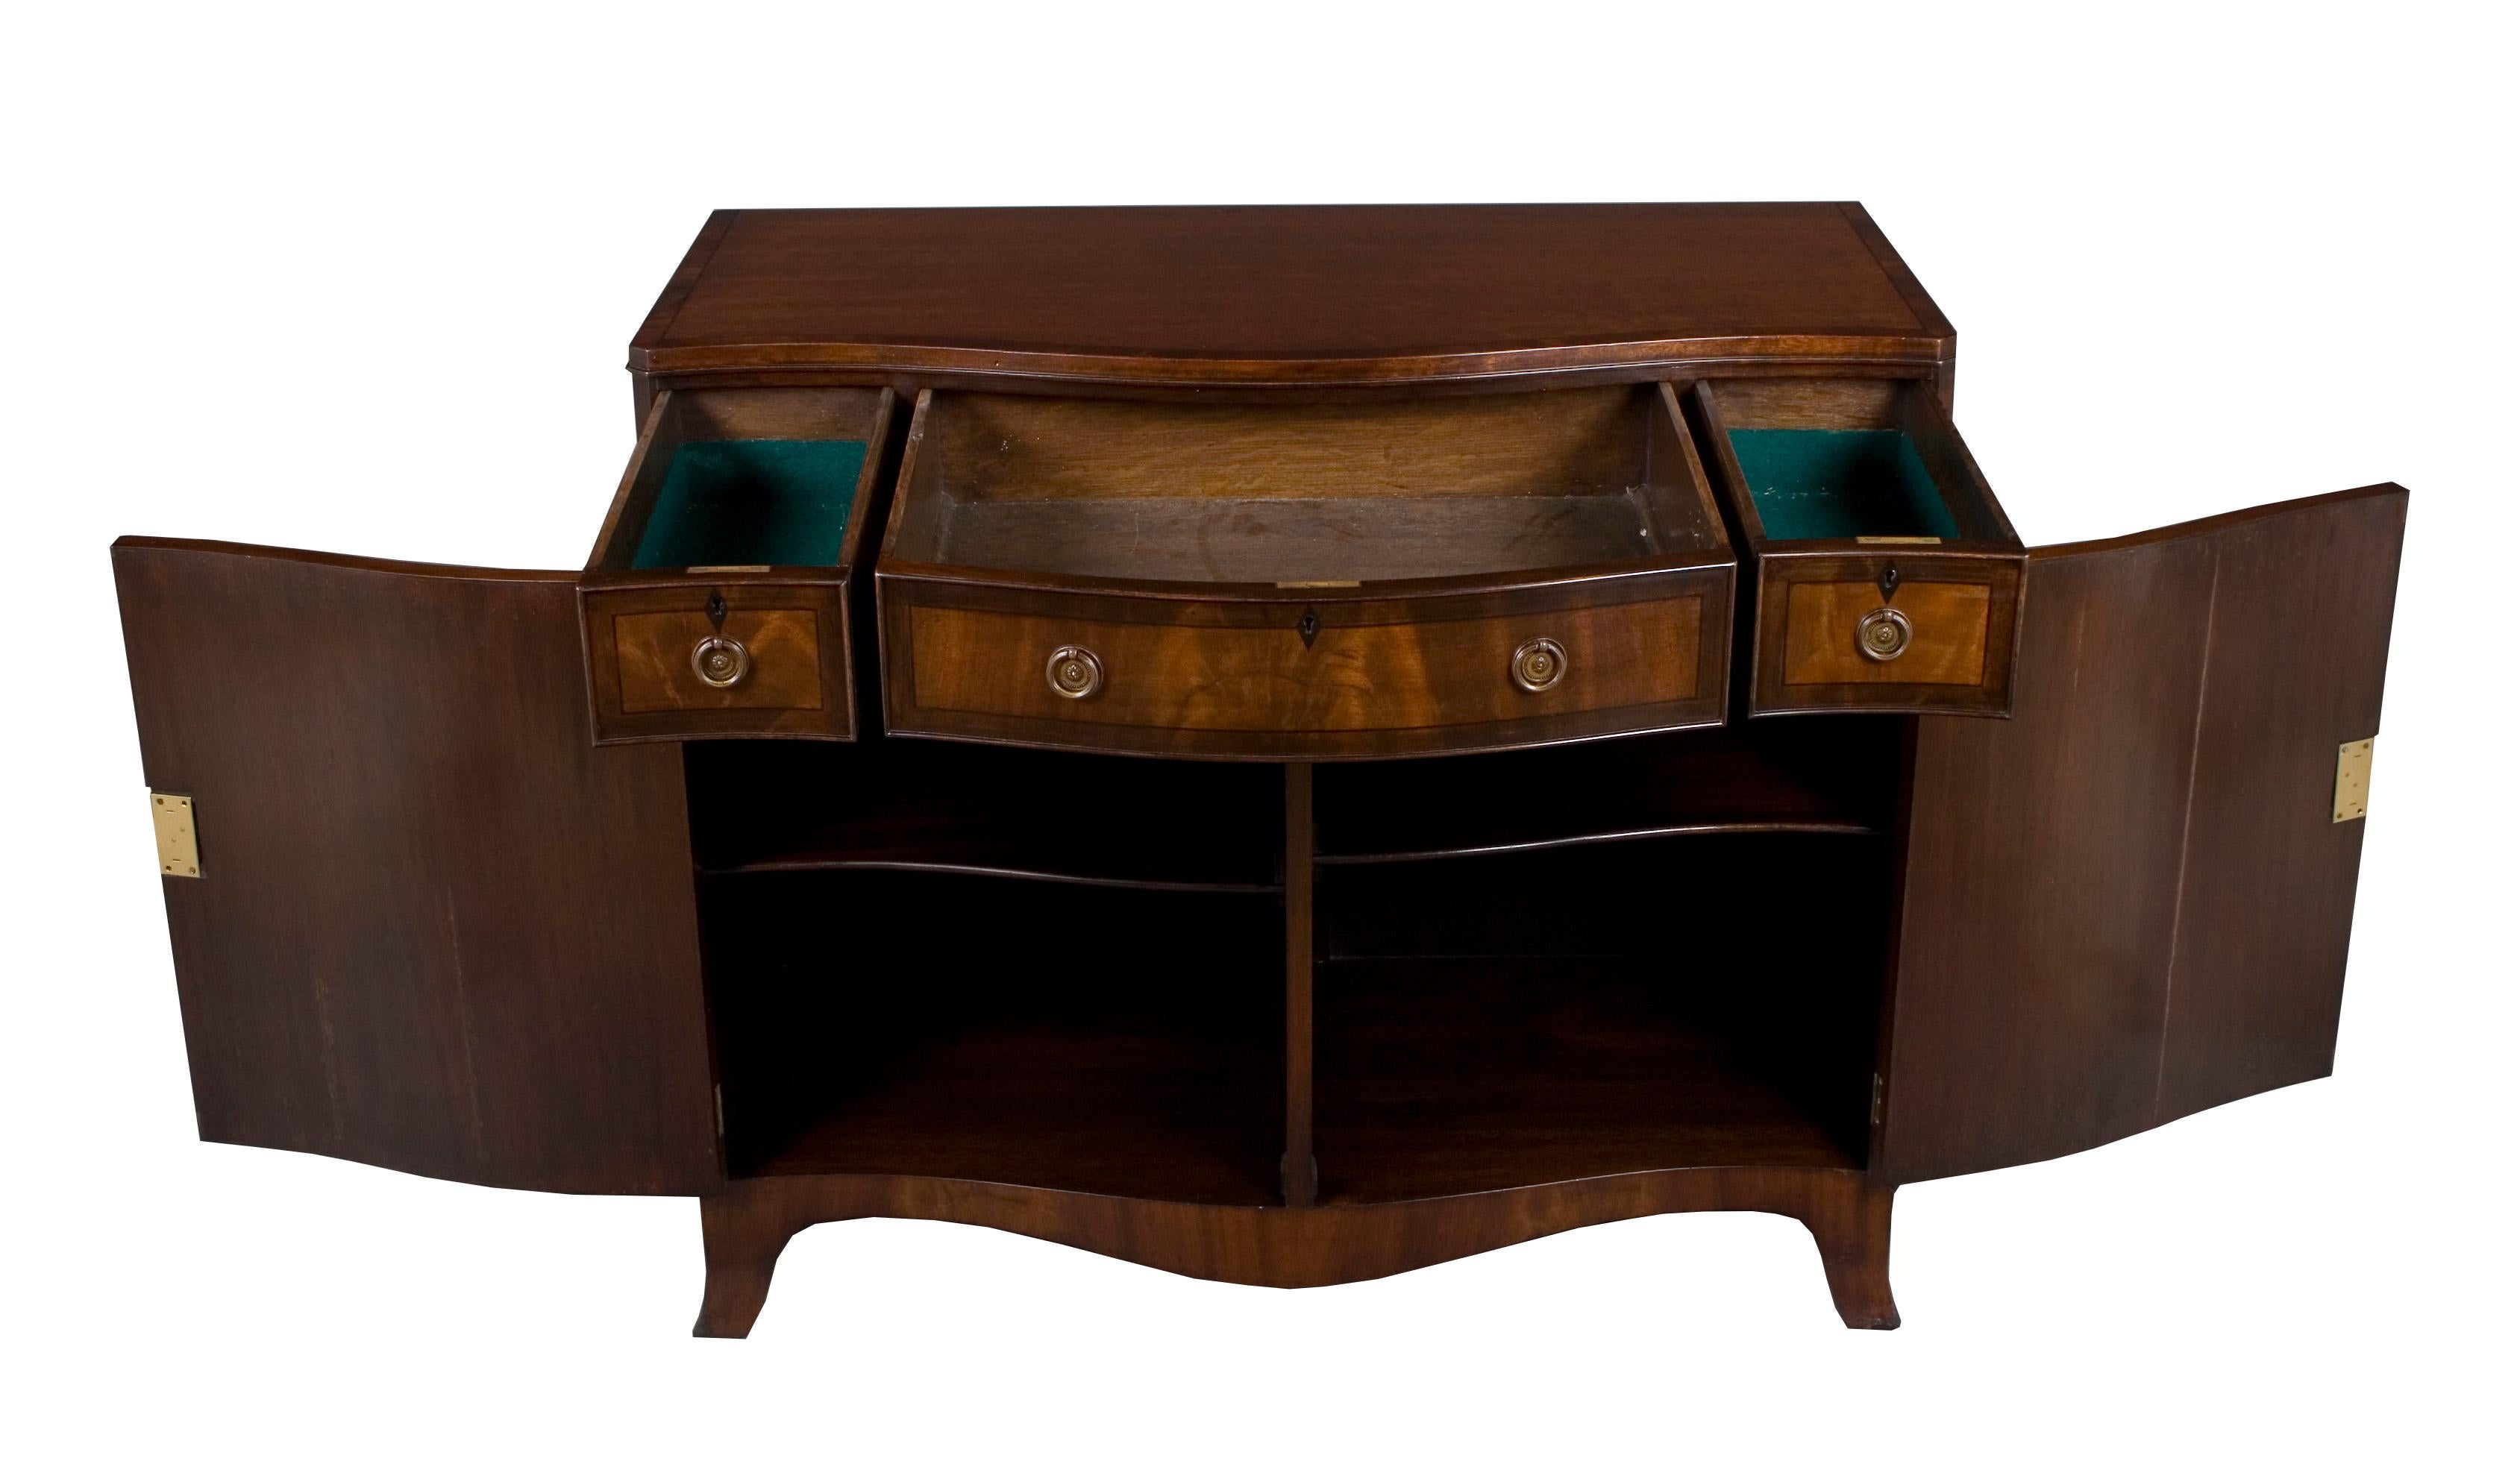 This unique buffet cabinet was made in England around the year 1960 of mahogany. The stunning serpentine front and black line ebony inlay come together to form a beautiful piece of furniture. A mahogany cross band on the top further and ebony inlaid